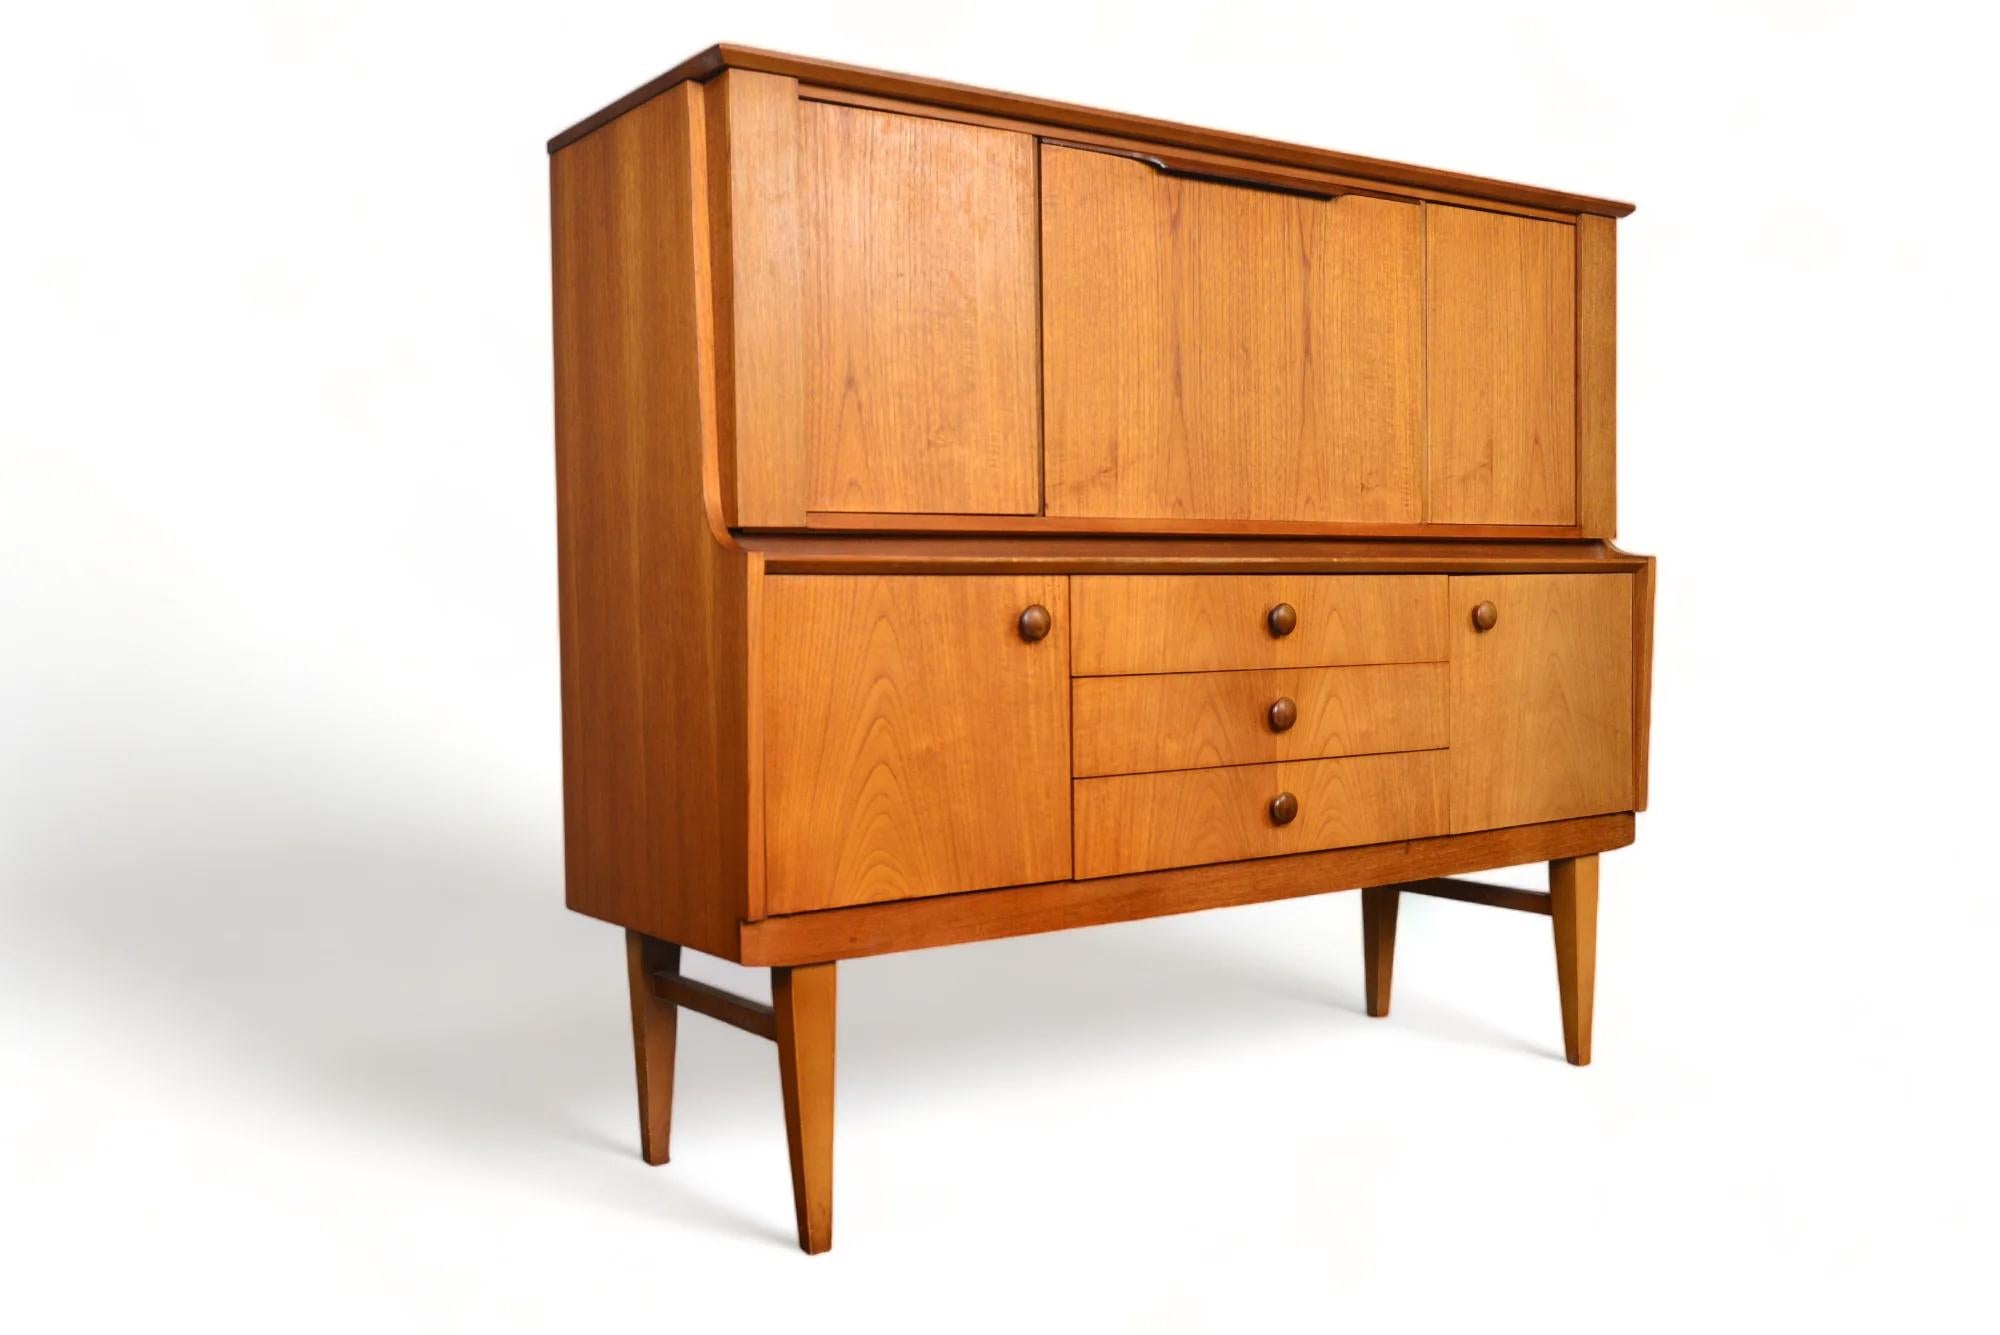 Mahogany English Modern Cocktail Cabinet In Teak With Fold Out Bar